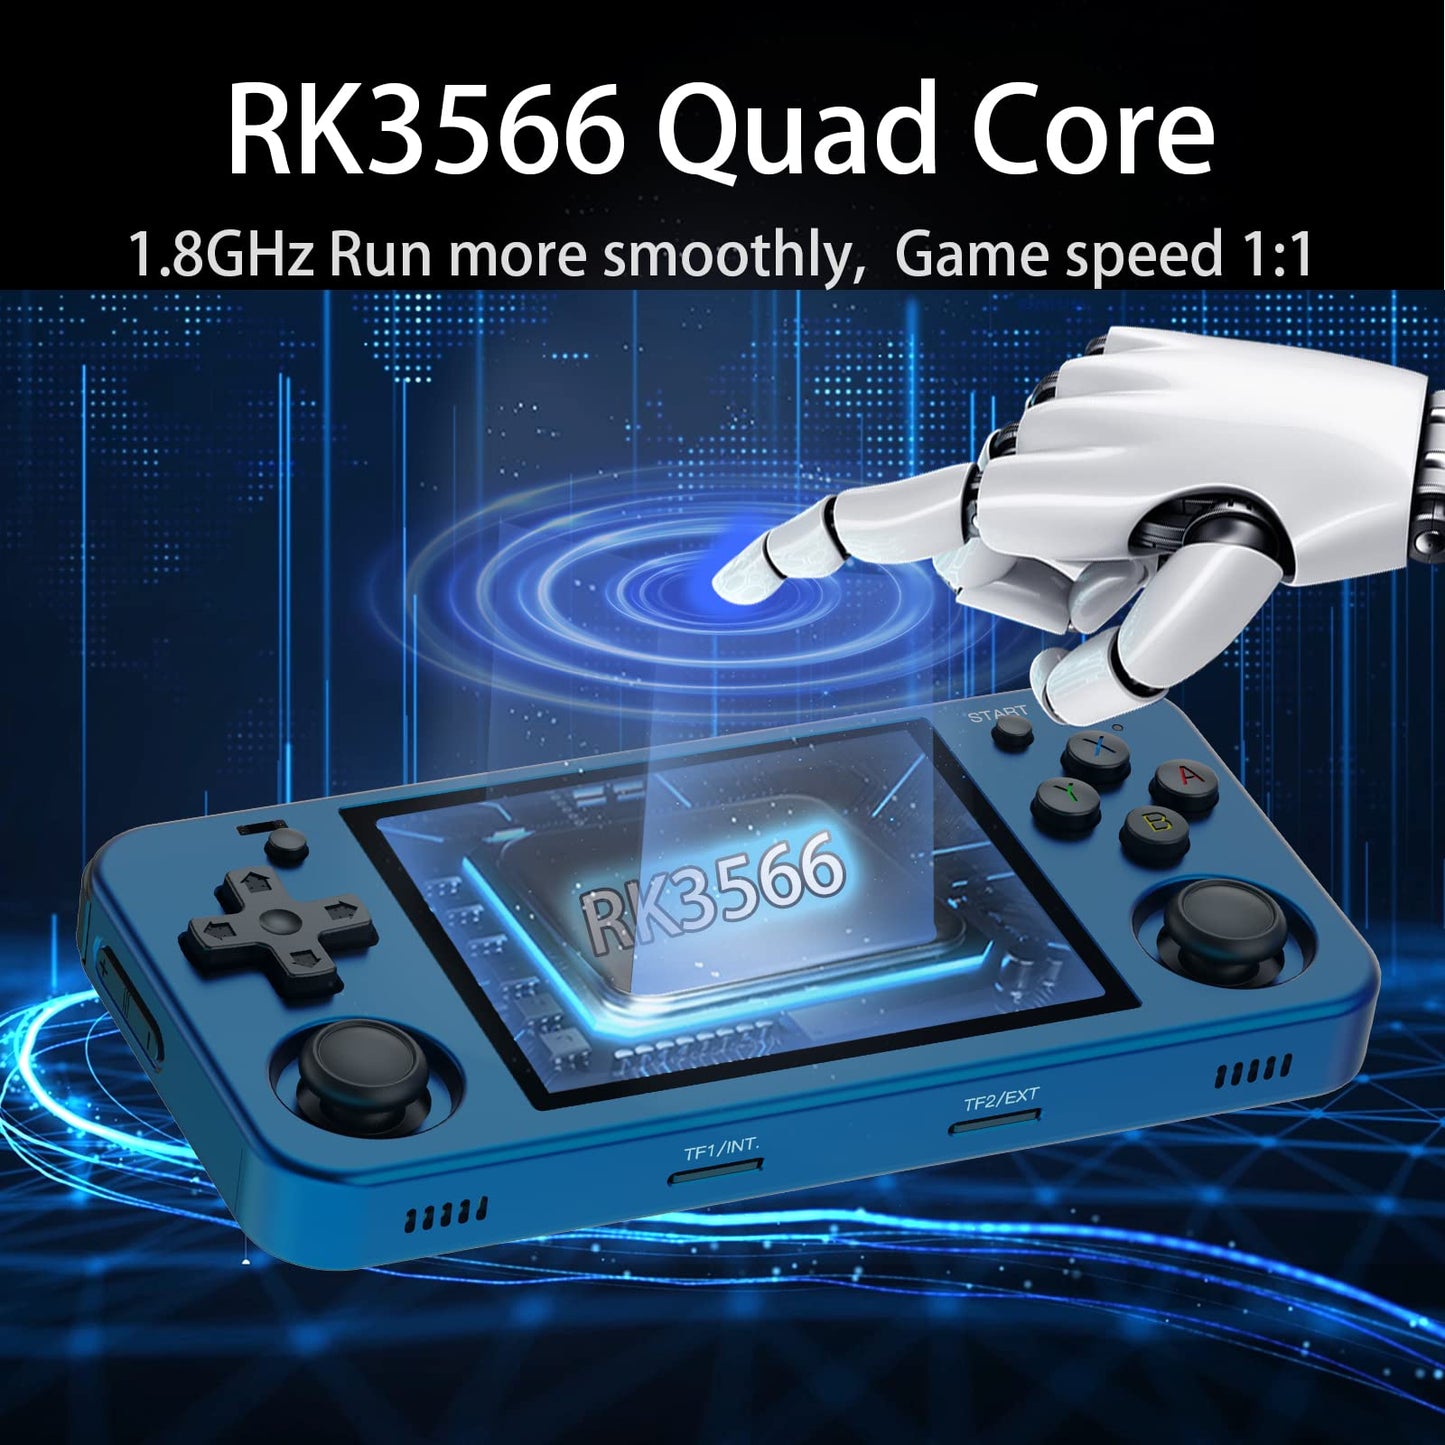 RG353M Handheld Game Console Built-in 64G Card 4452 Games, Aluminum Alloy Shell and 3.5 inch IPS Multi-Touch Screen,Dual OS Android 11 and Linux Support 5G WiFi 4.2 Bluetooth Streaming and HDMI